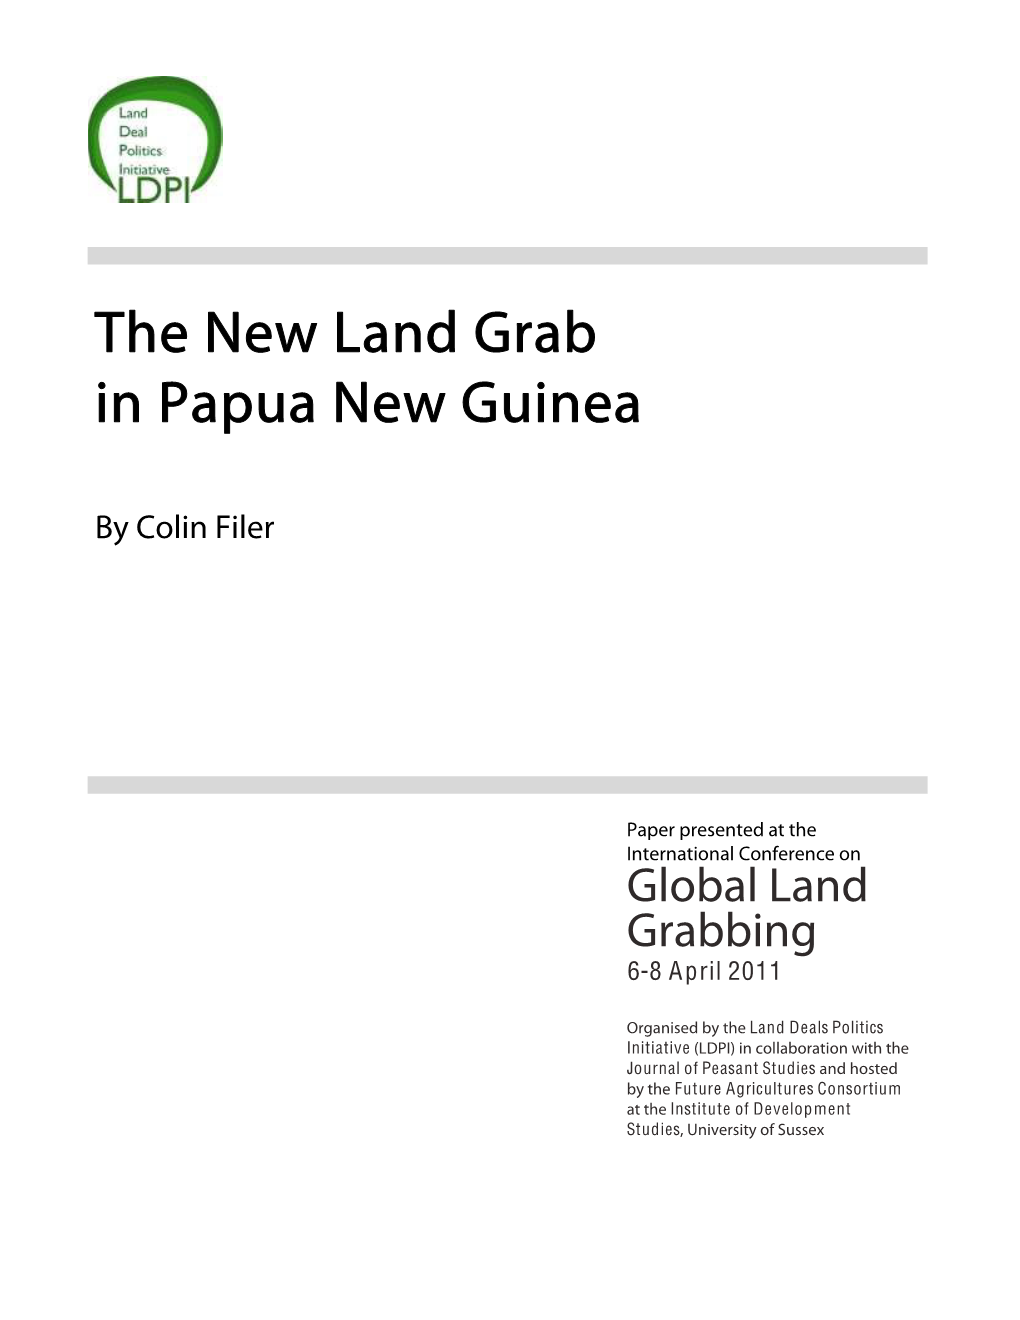 The New Land Grab in Papua New Guinea